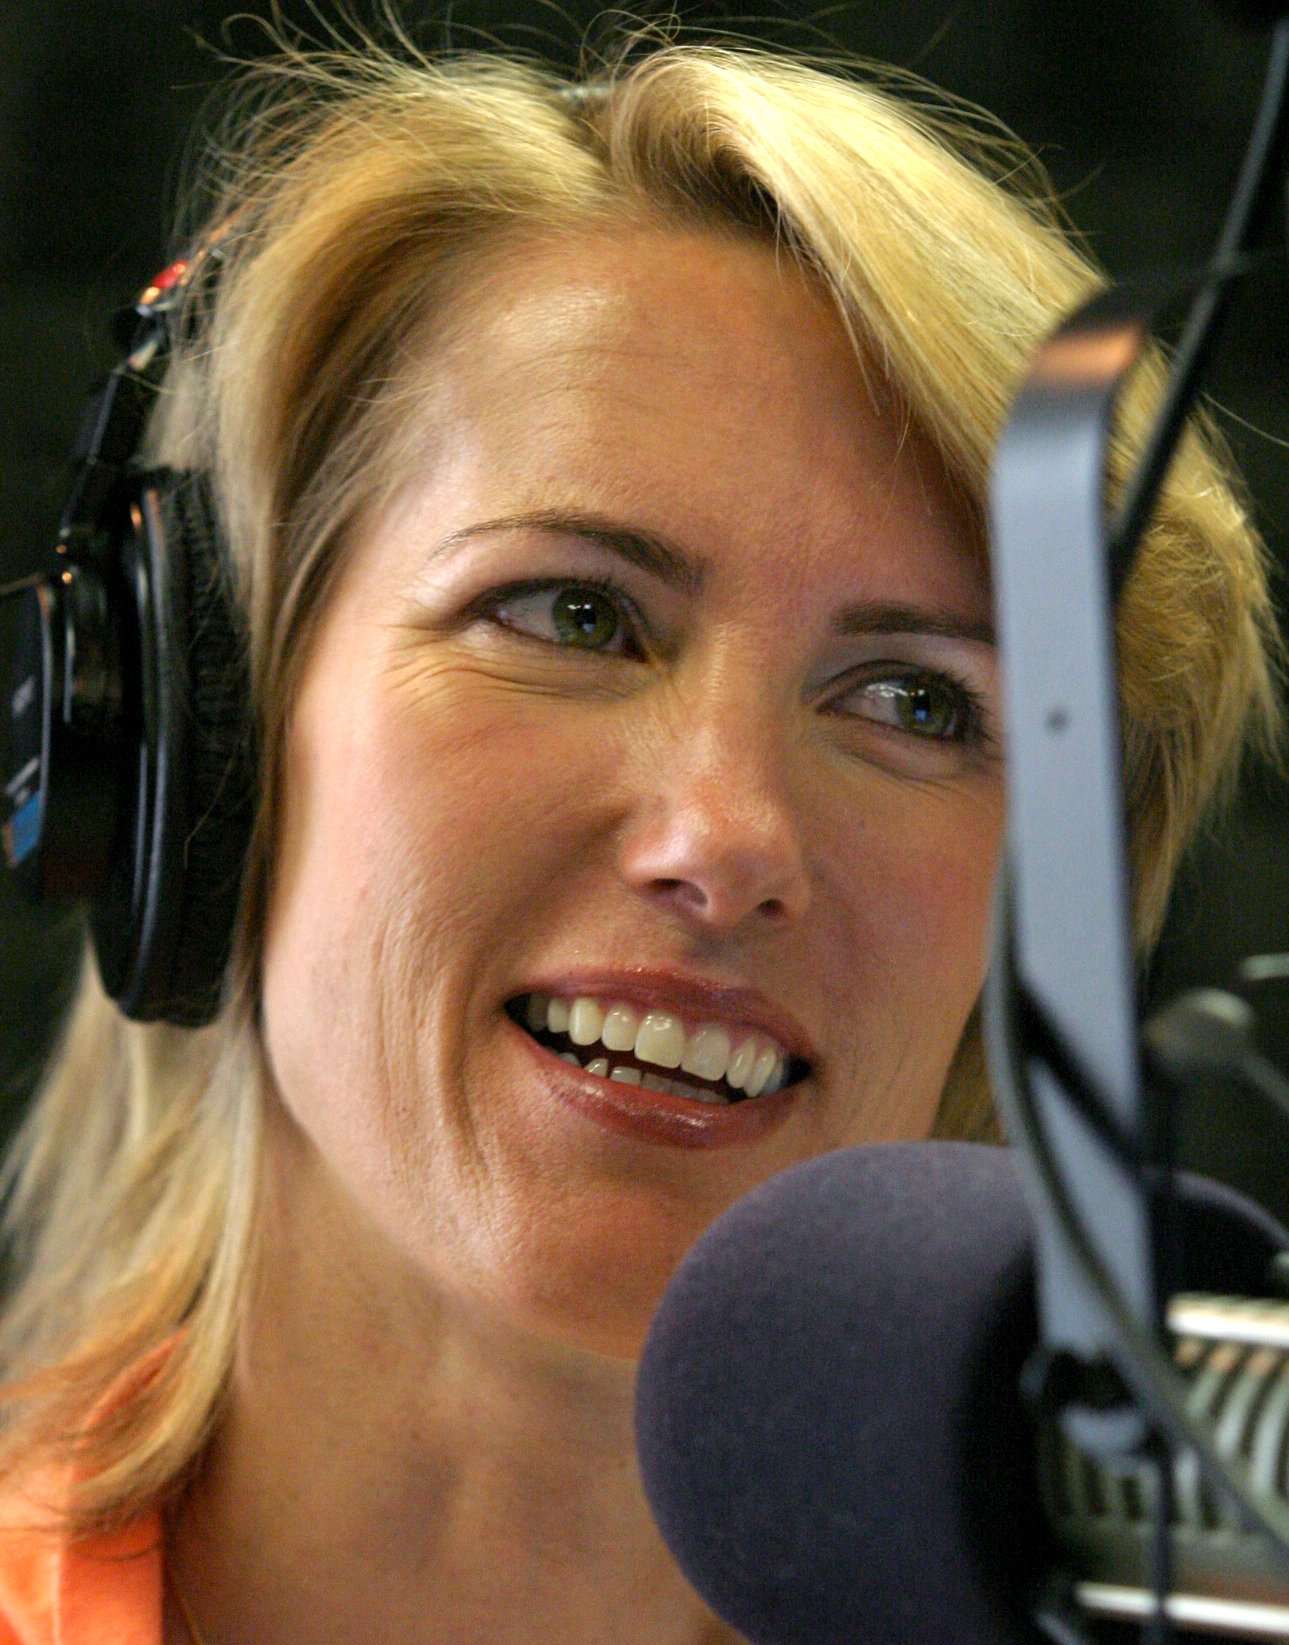  Laura Ingraham in her studio after the Laura Ingraham Show in 2004. |  Source: Getty Images